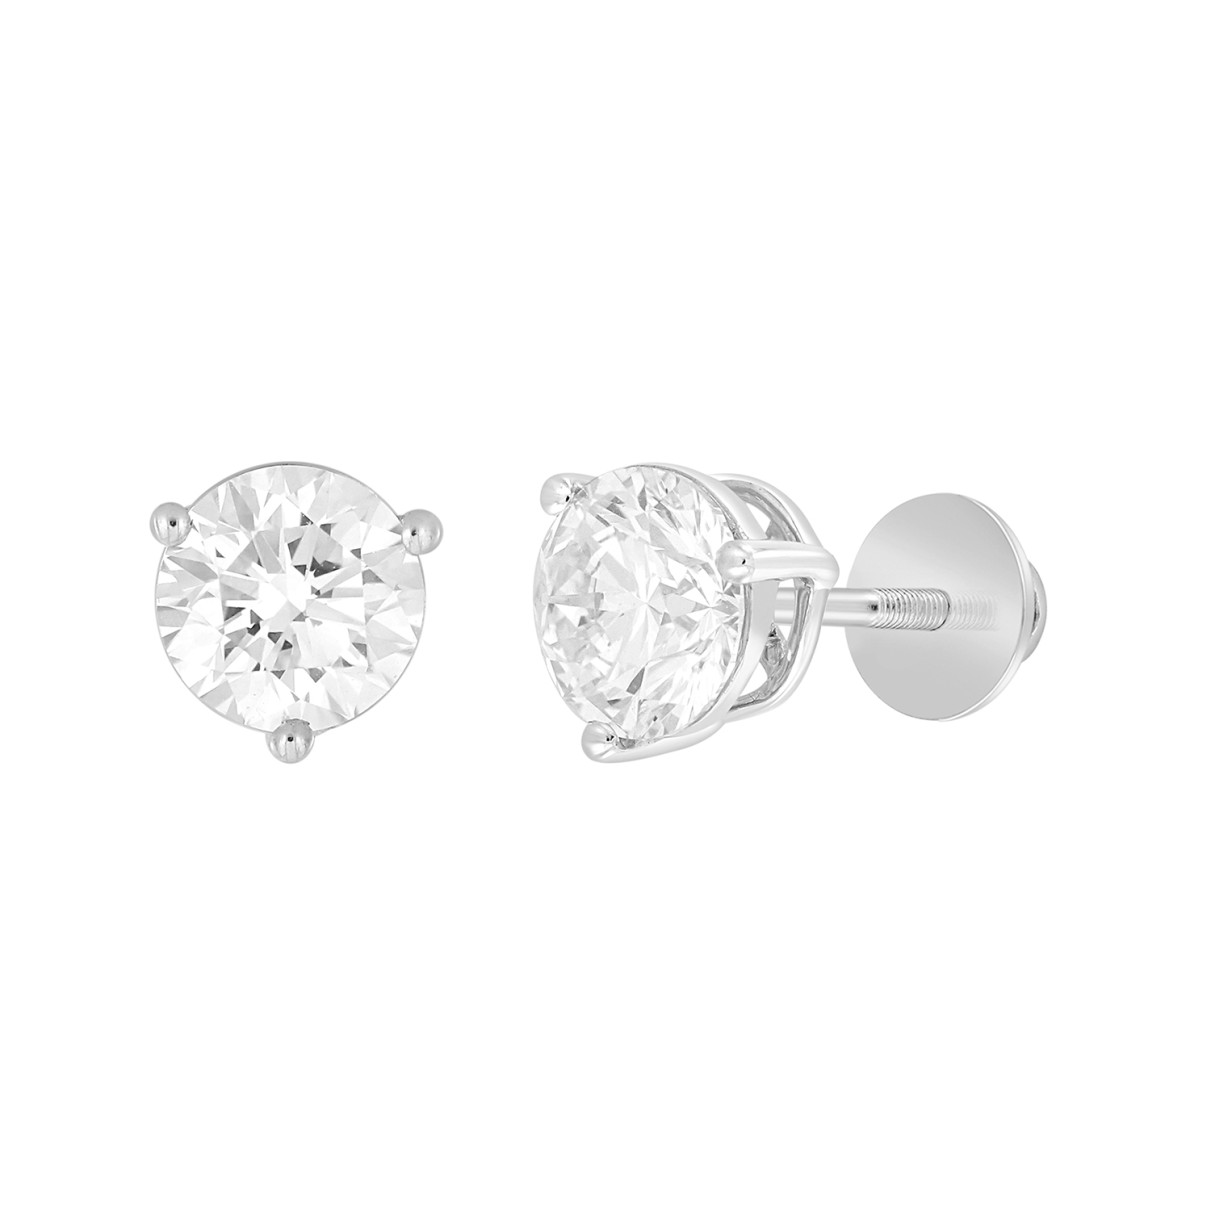 LADIES SOLITAIRE EARRINGS 1 1/2CT ROUND DIAMOND 14K WHITE GOLD 